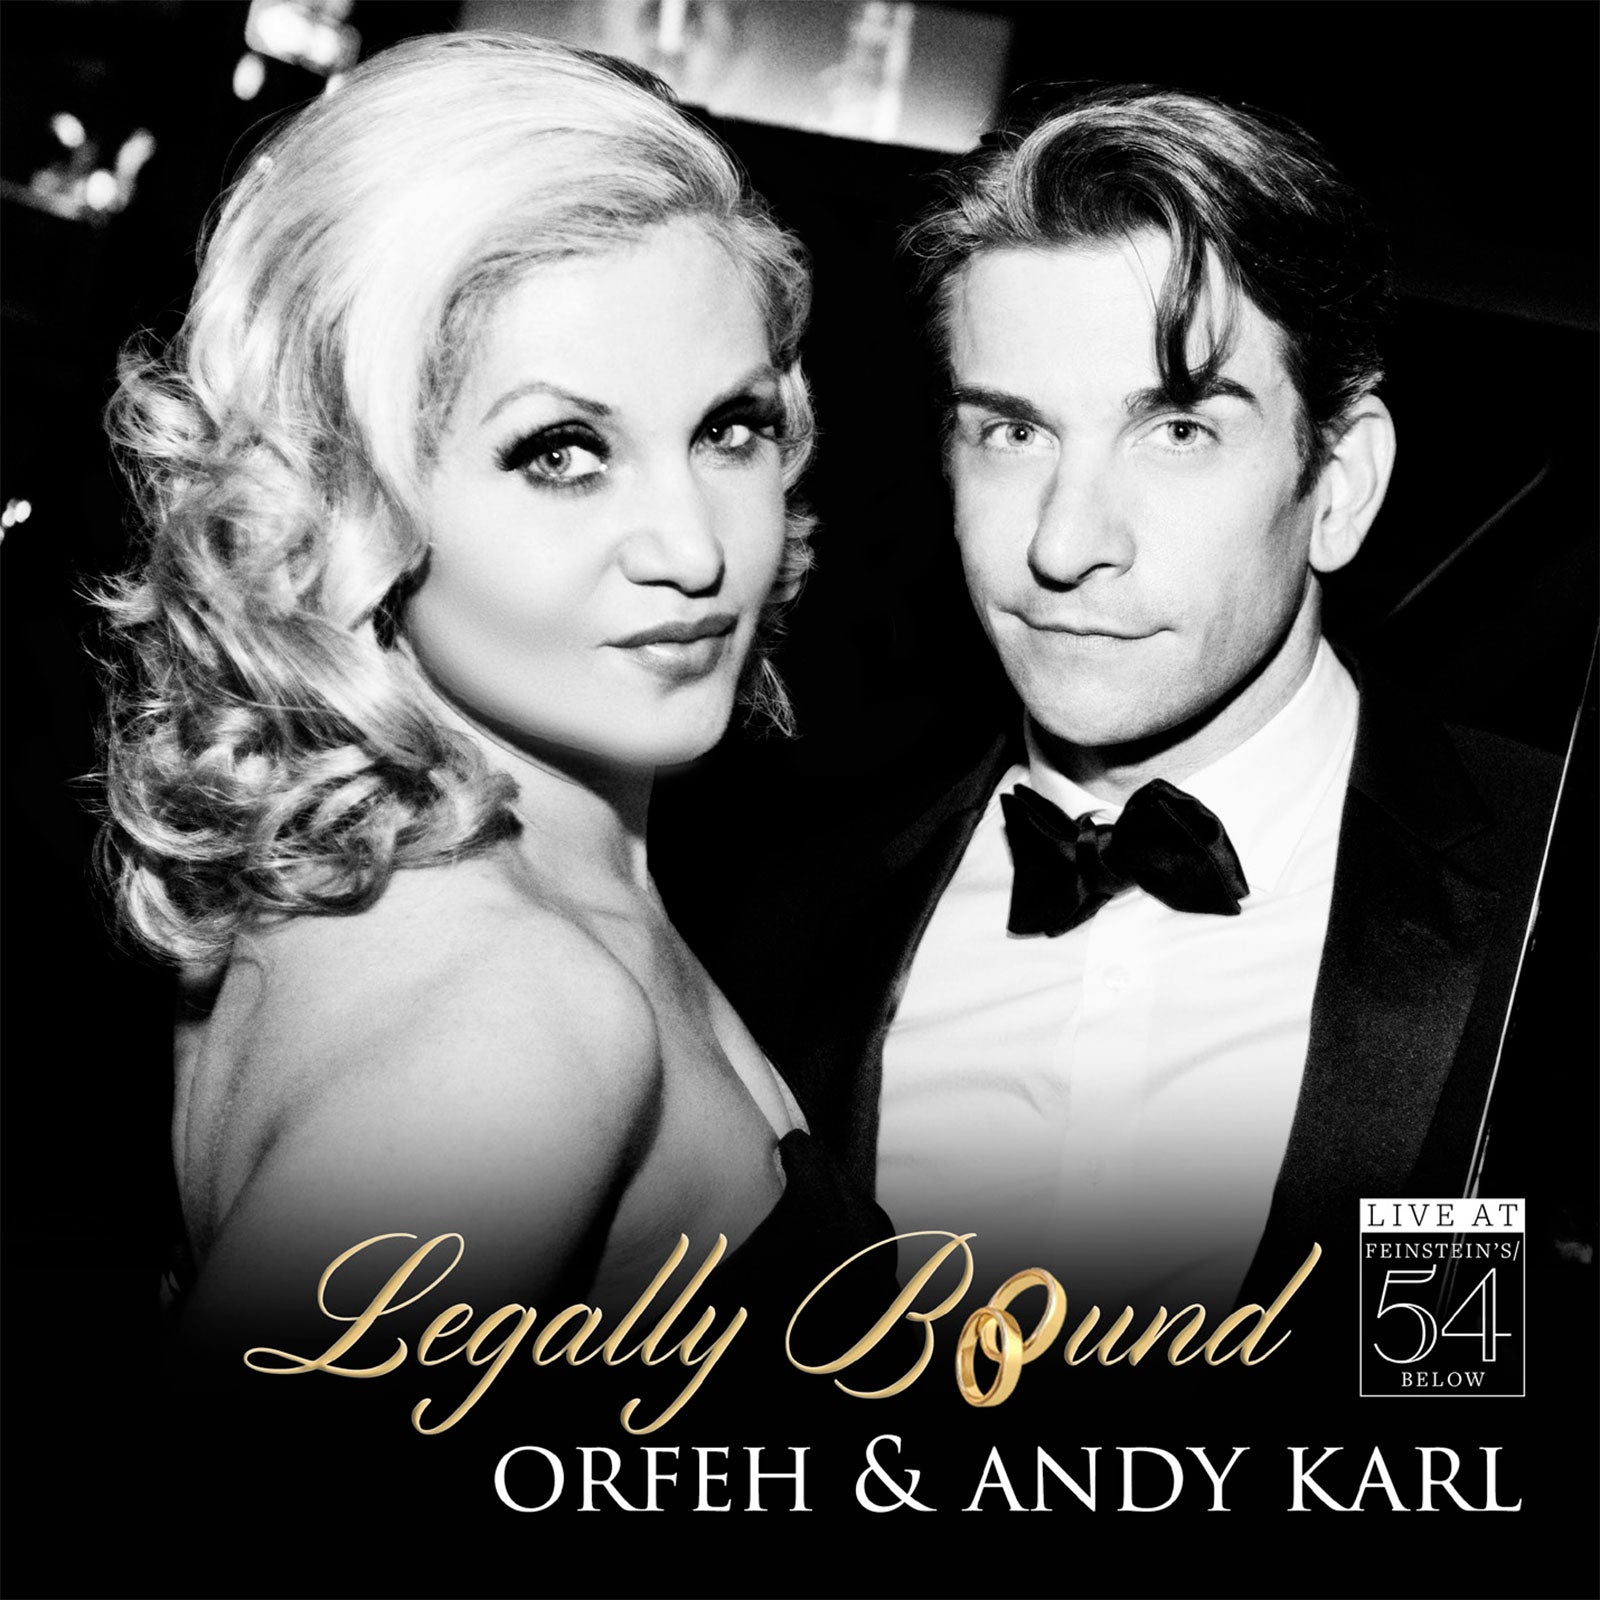 Orfeh & Andy Karl: Legally Bound – Live at Feinstein's/54 Below [CD]